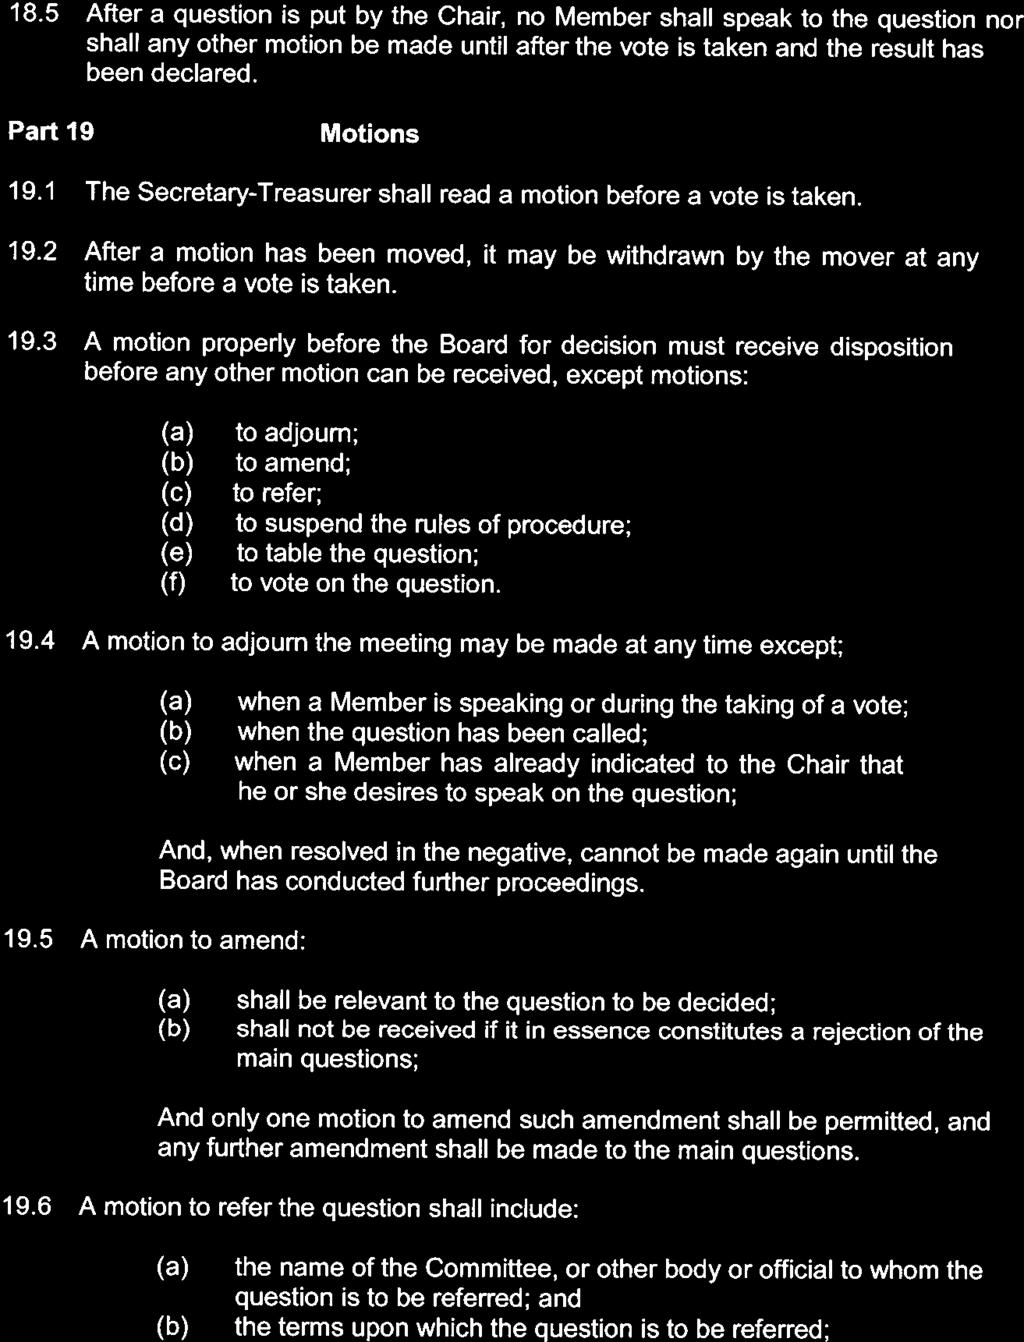 18.5 After a question is put by the Chair, no Member shall speak to the question nor shall any other motion be made until after the vote is taken and the result has been declared. Part 19 Motions 19.